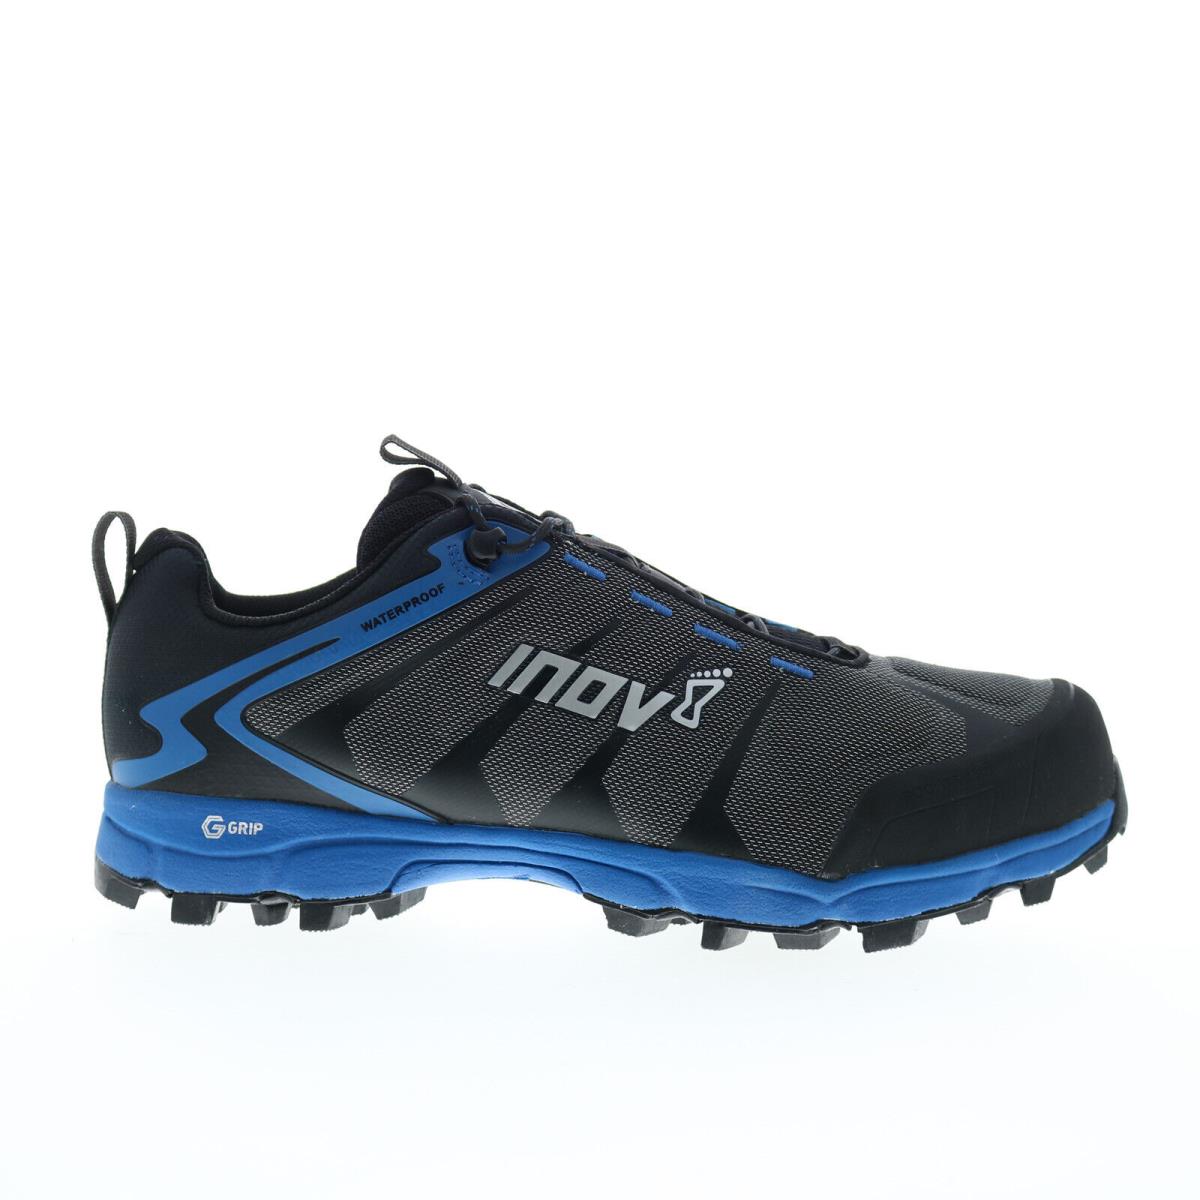 Inov-8 Roclite G 350 000857-BKBL Mens Black Synthetic Athletic Hiking Shoes 11